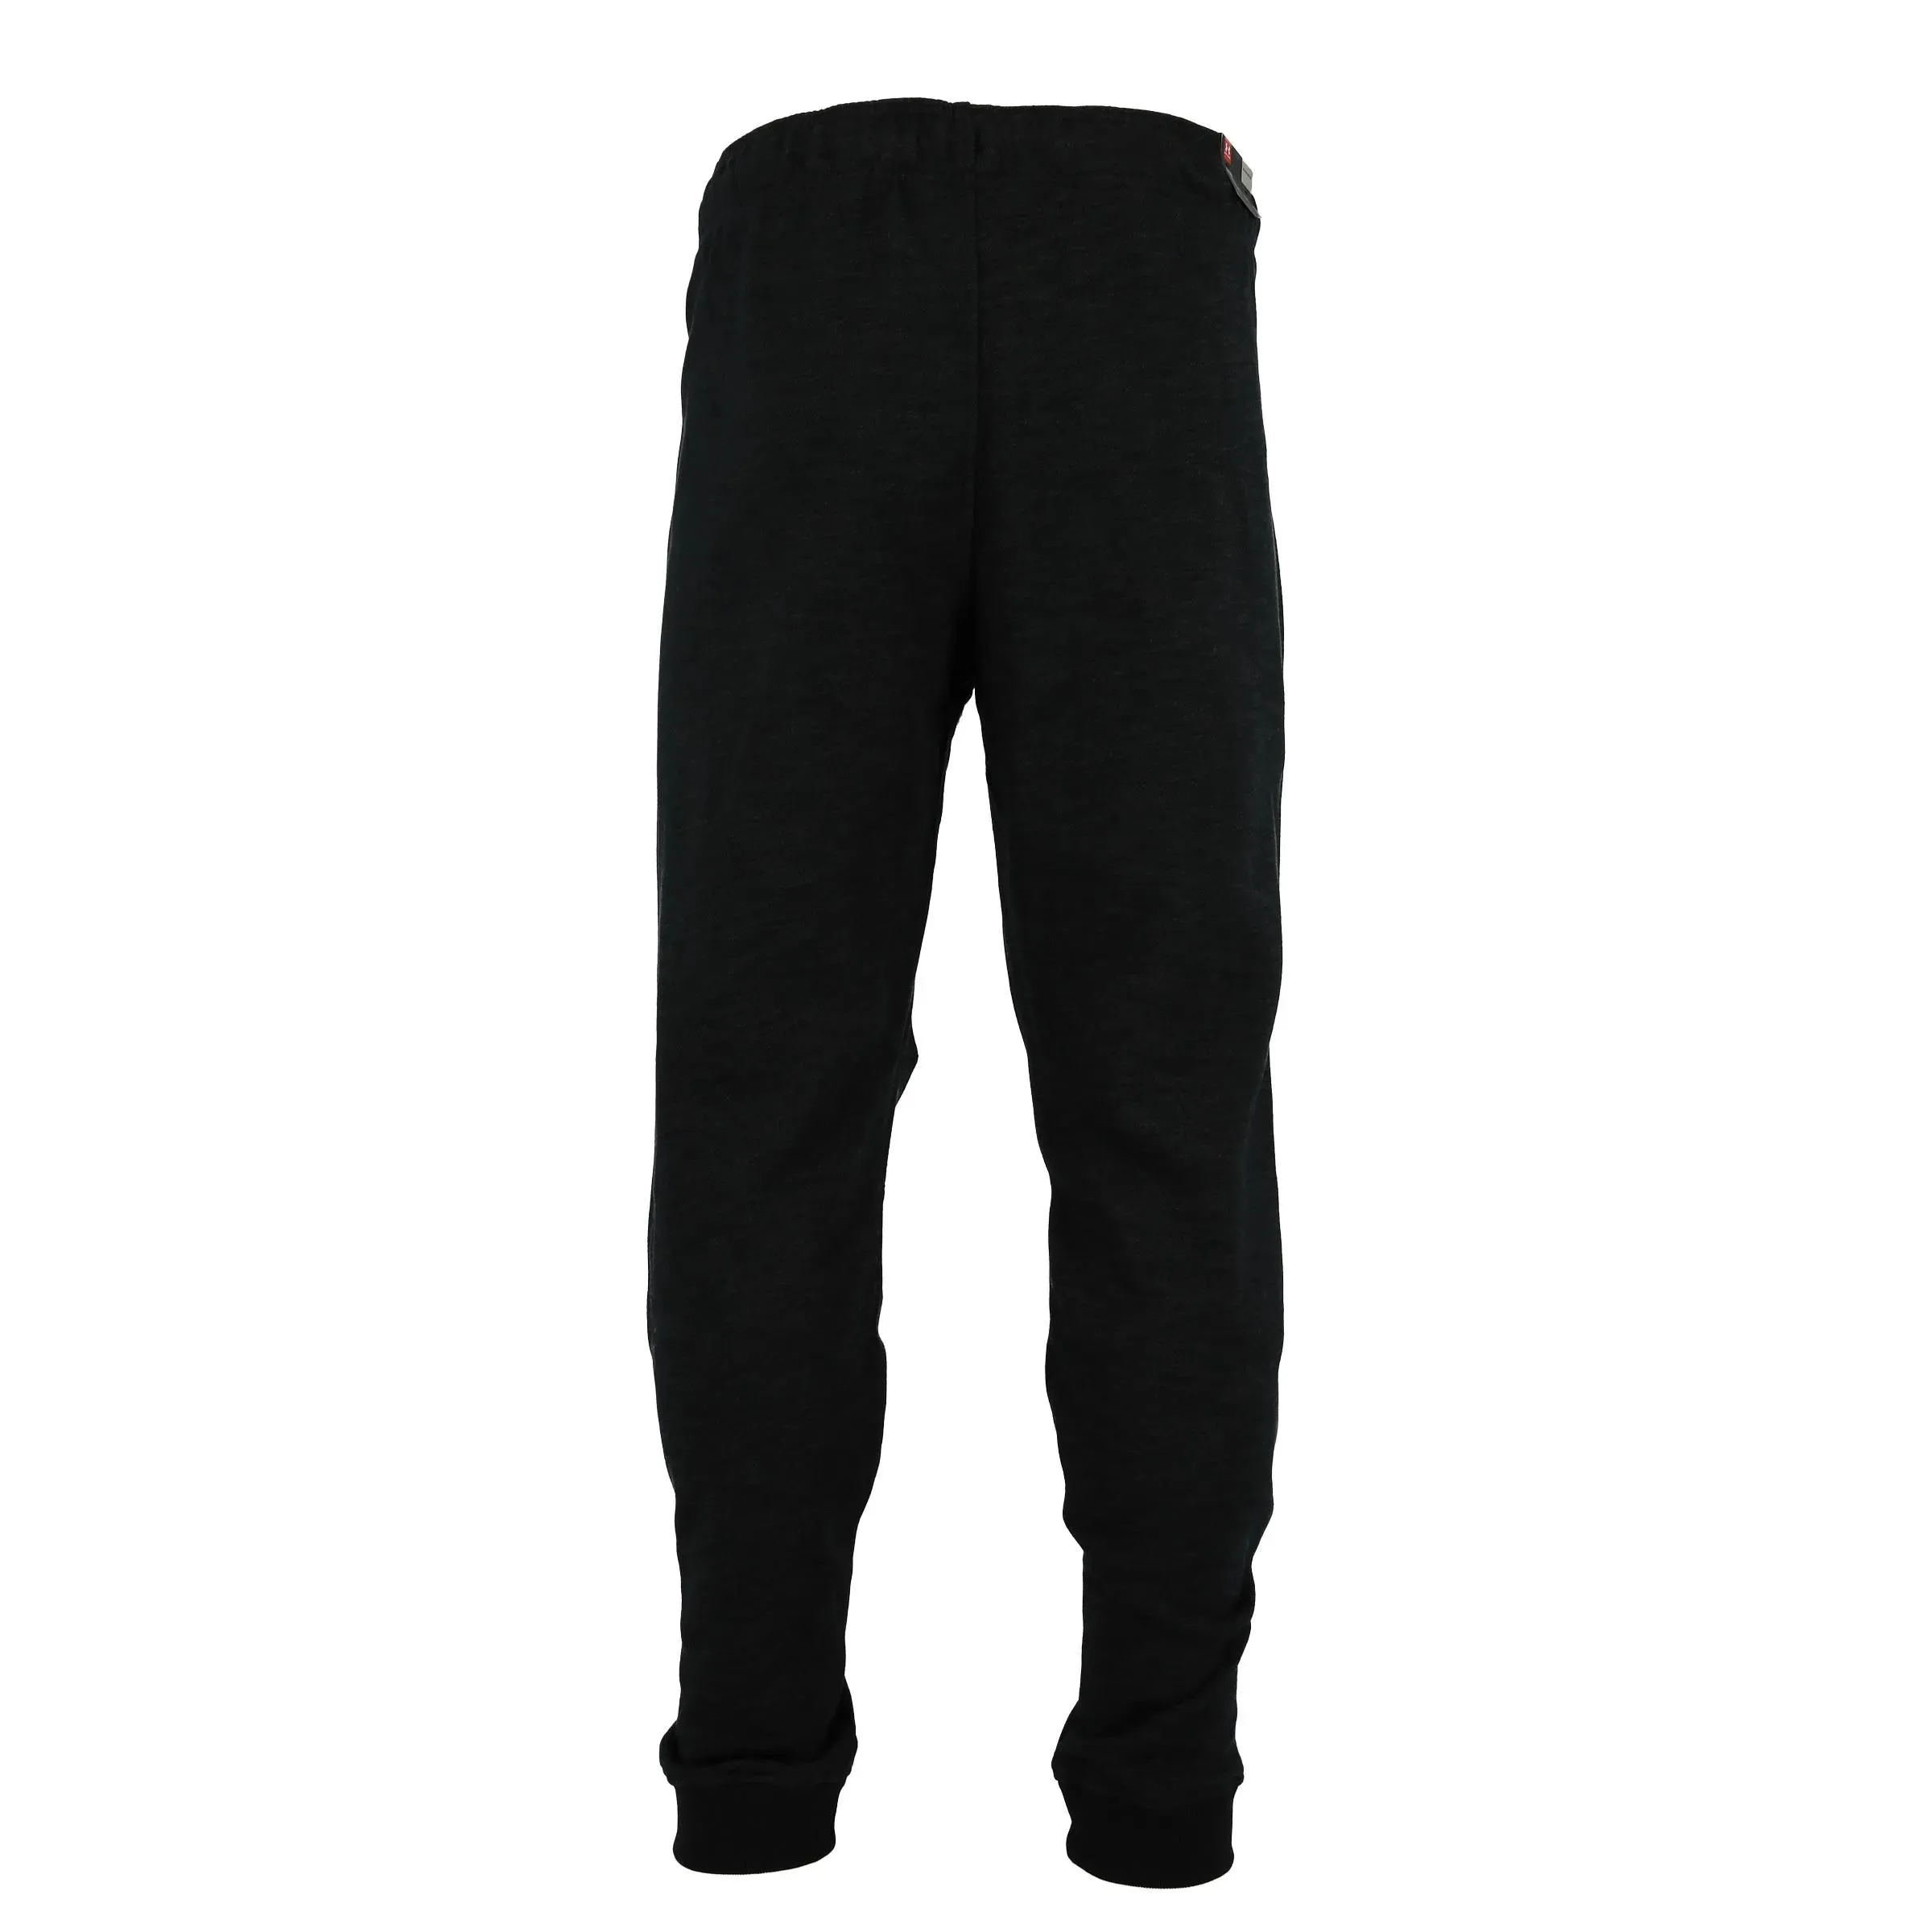 Under Armour UA Baseline Tapered Pant 